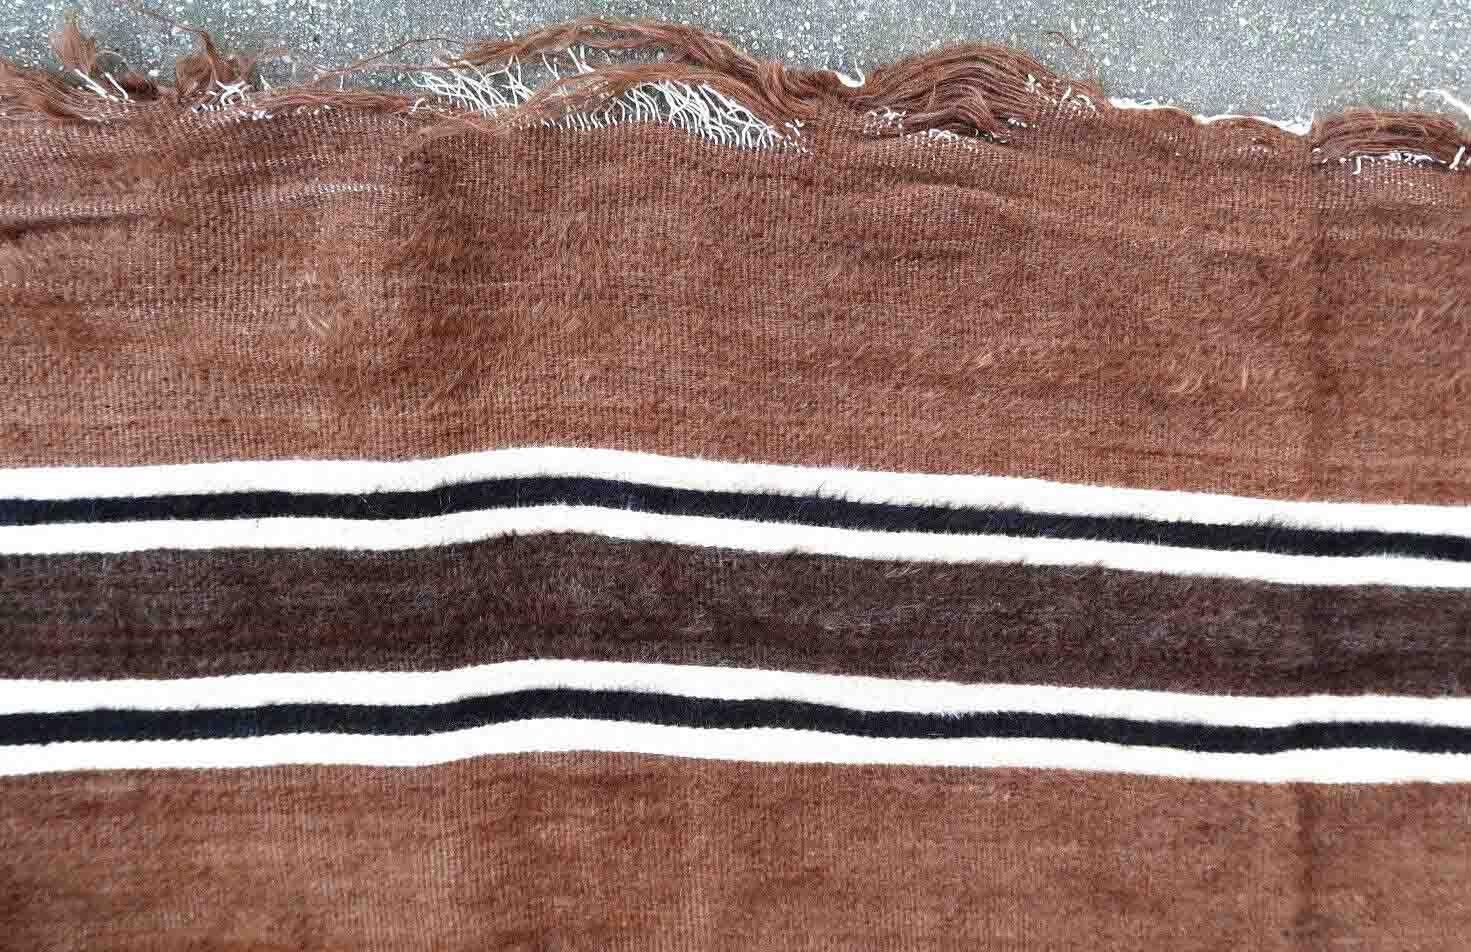 Vintage rug from Syria made in Angora wool in brown color. The rug is from the middle of 20th century in original condition, it has some signs of age.

-condition: original, some signs of age,

-circa: 1950s,

-size: 4.8' x 6.4' (147cm x